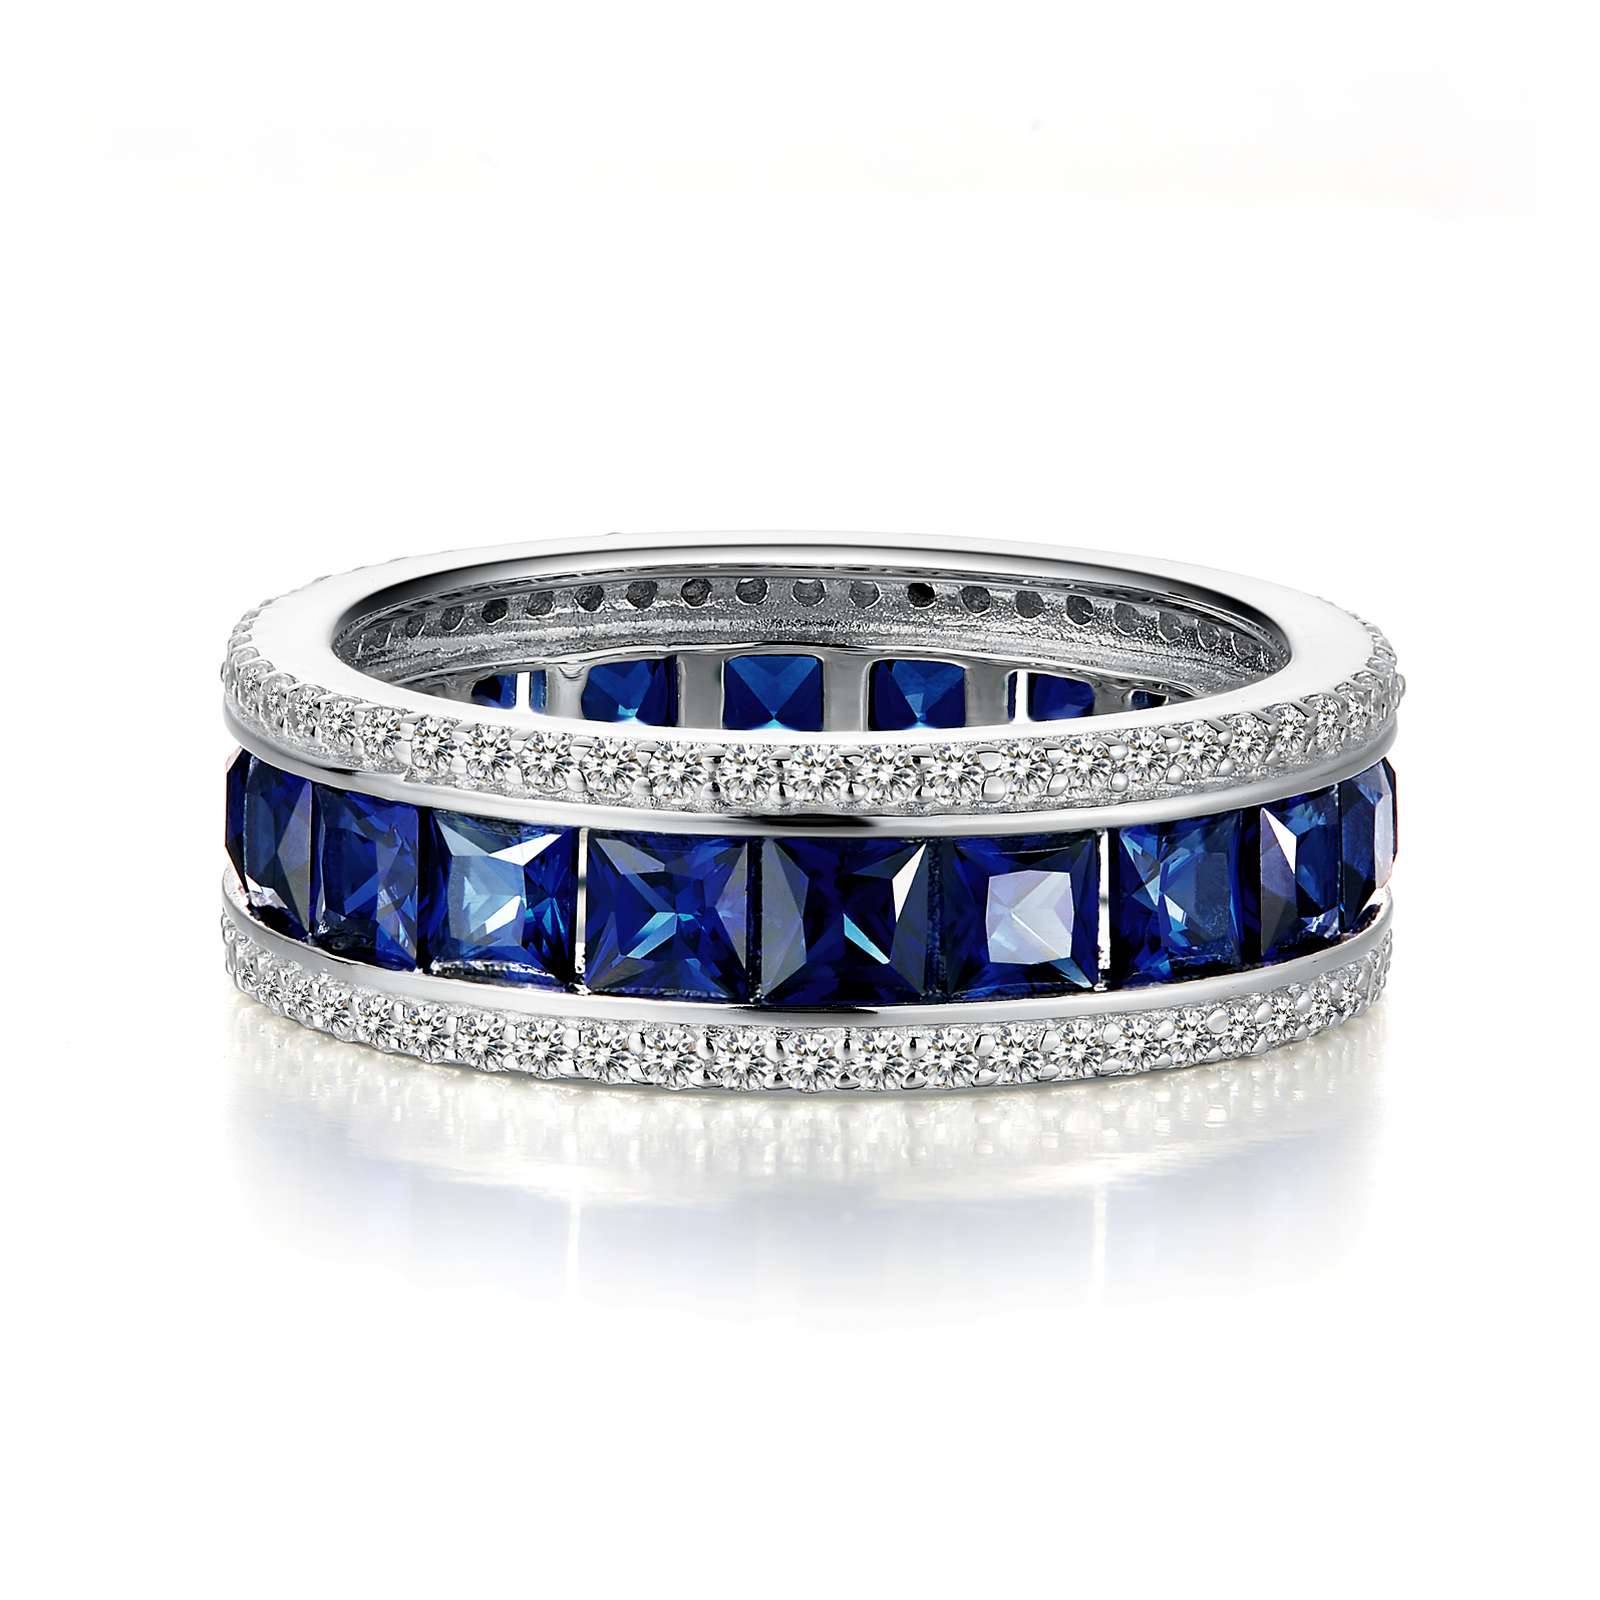 Classic Simulated Diamond And Synthetic Sapphire Platinum Bonded Ring Jacqueline's Fine Jewelry Morgantown, WV